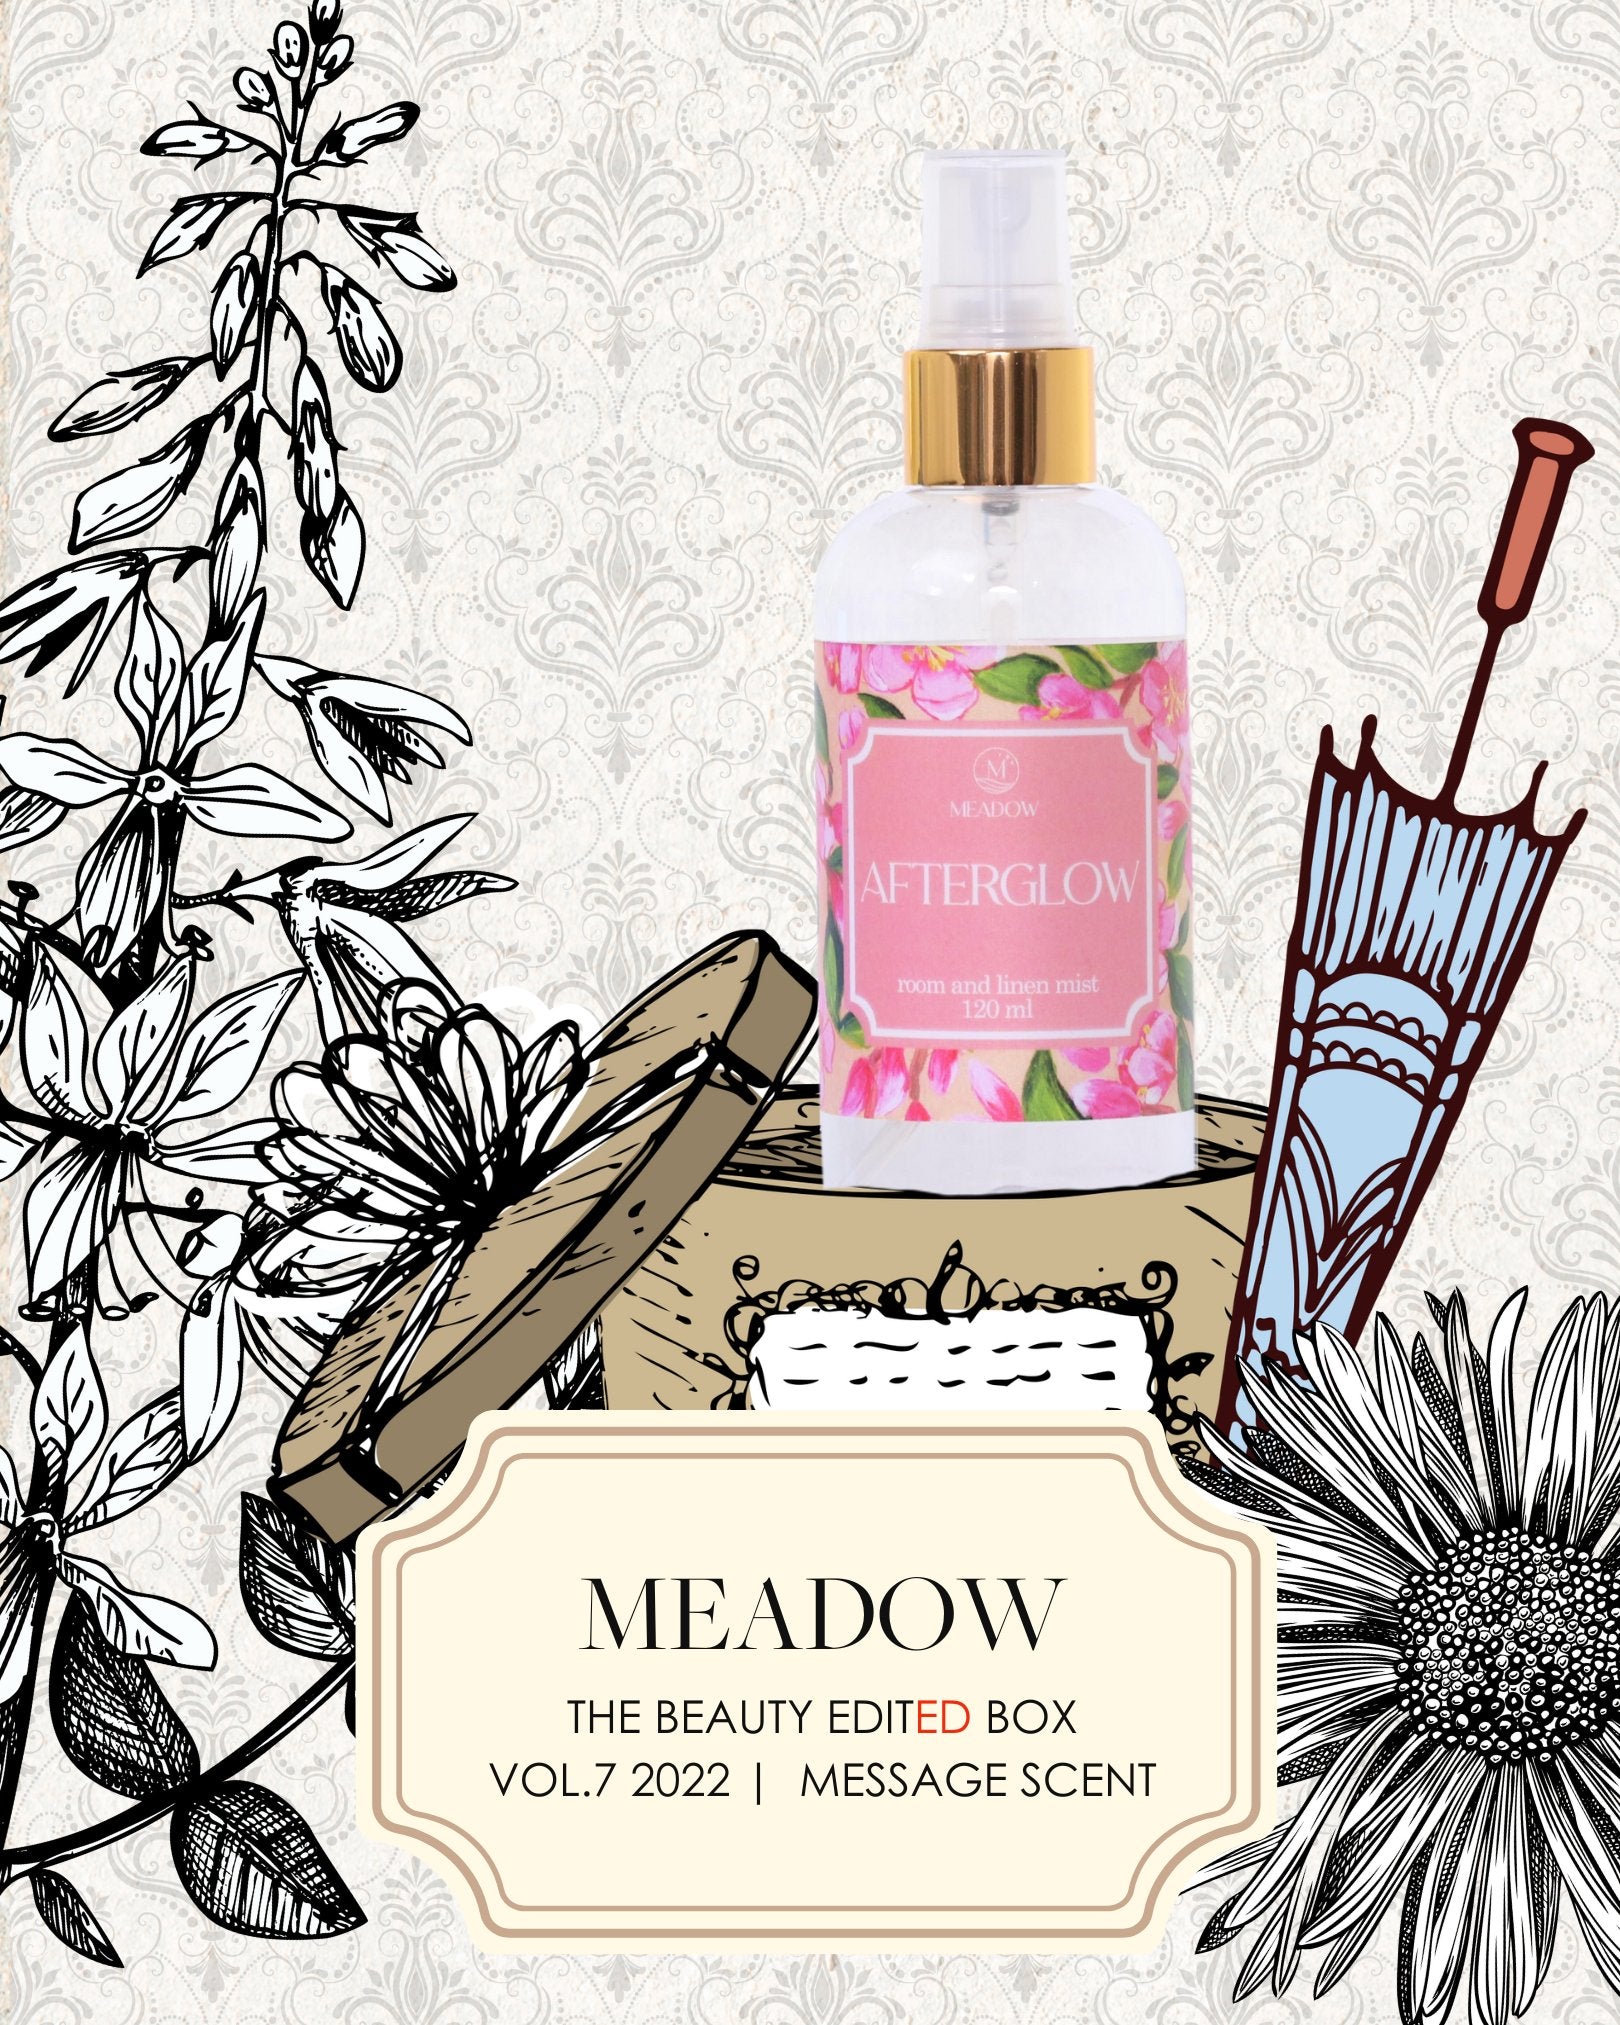 Inside The Box: Meadow Room and Linen Mist